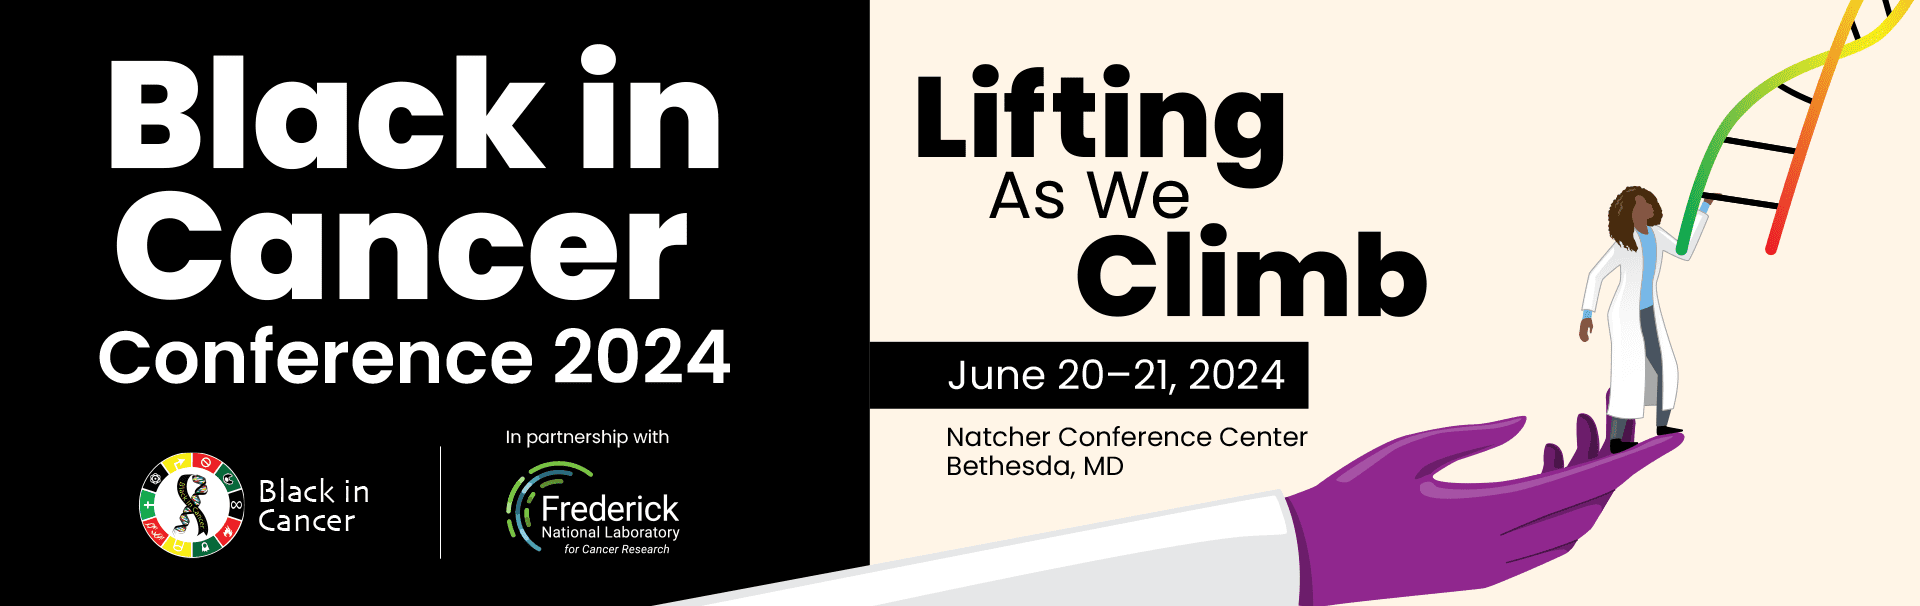 Black in Cancer Conference, June 20-21, 2024 in Bethesda, MD. Theme: Lifting As We Climb